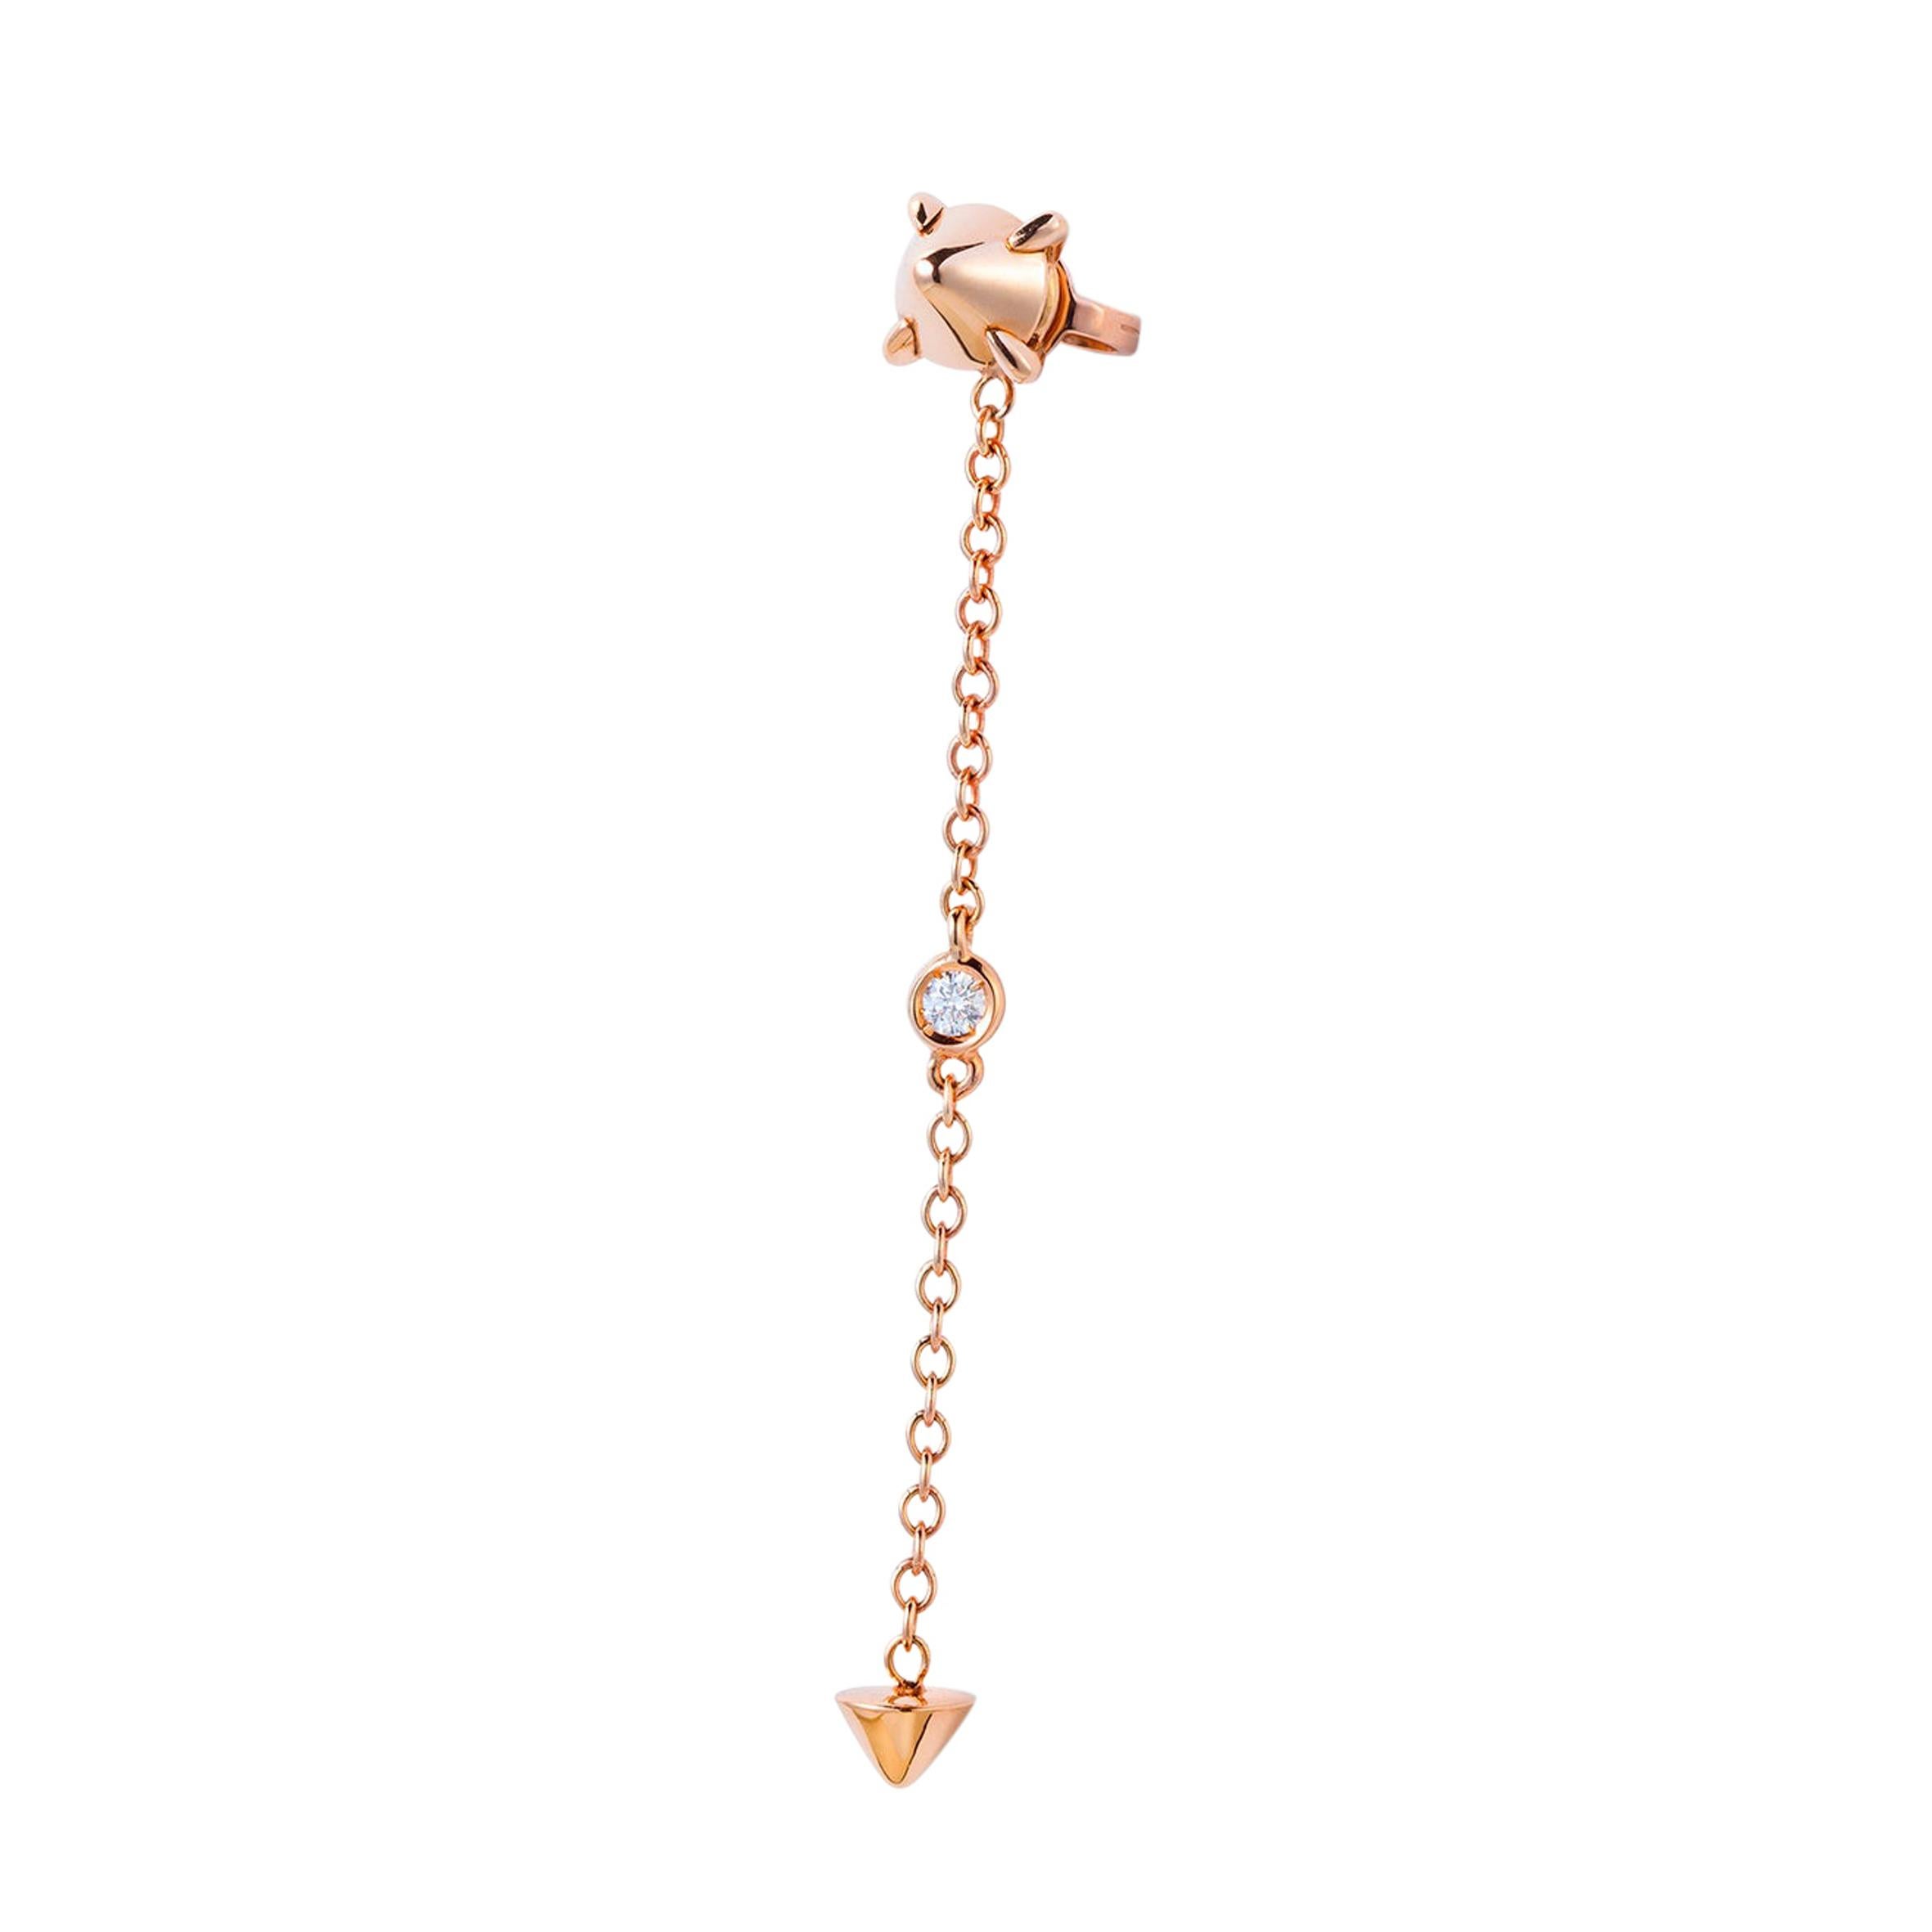 Mattioli Navettes Earrings in 18 K Rose Gold and Mother of Pearl